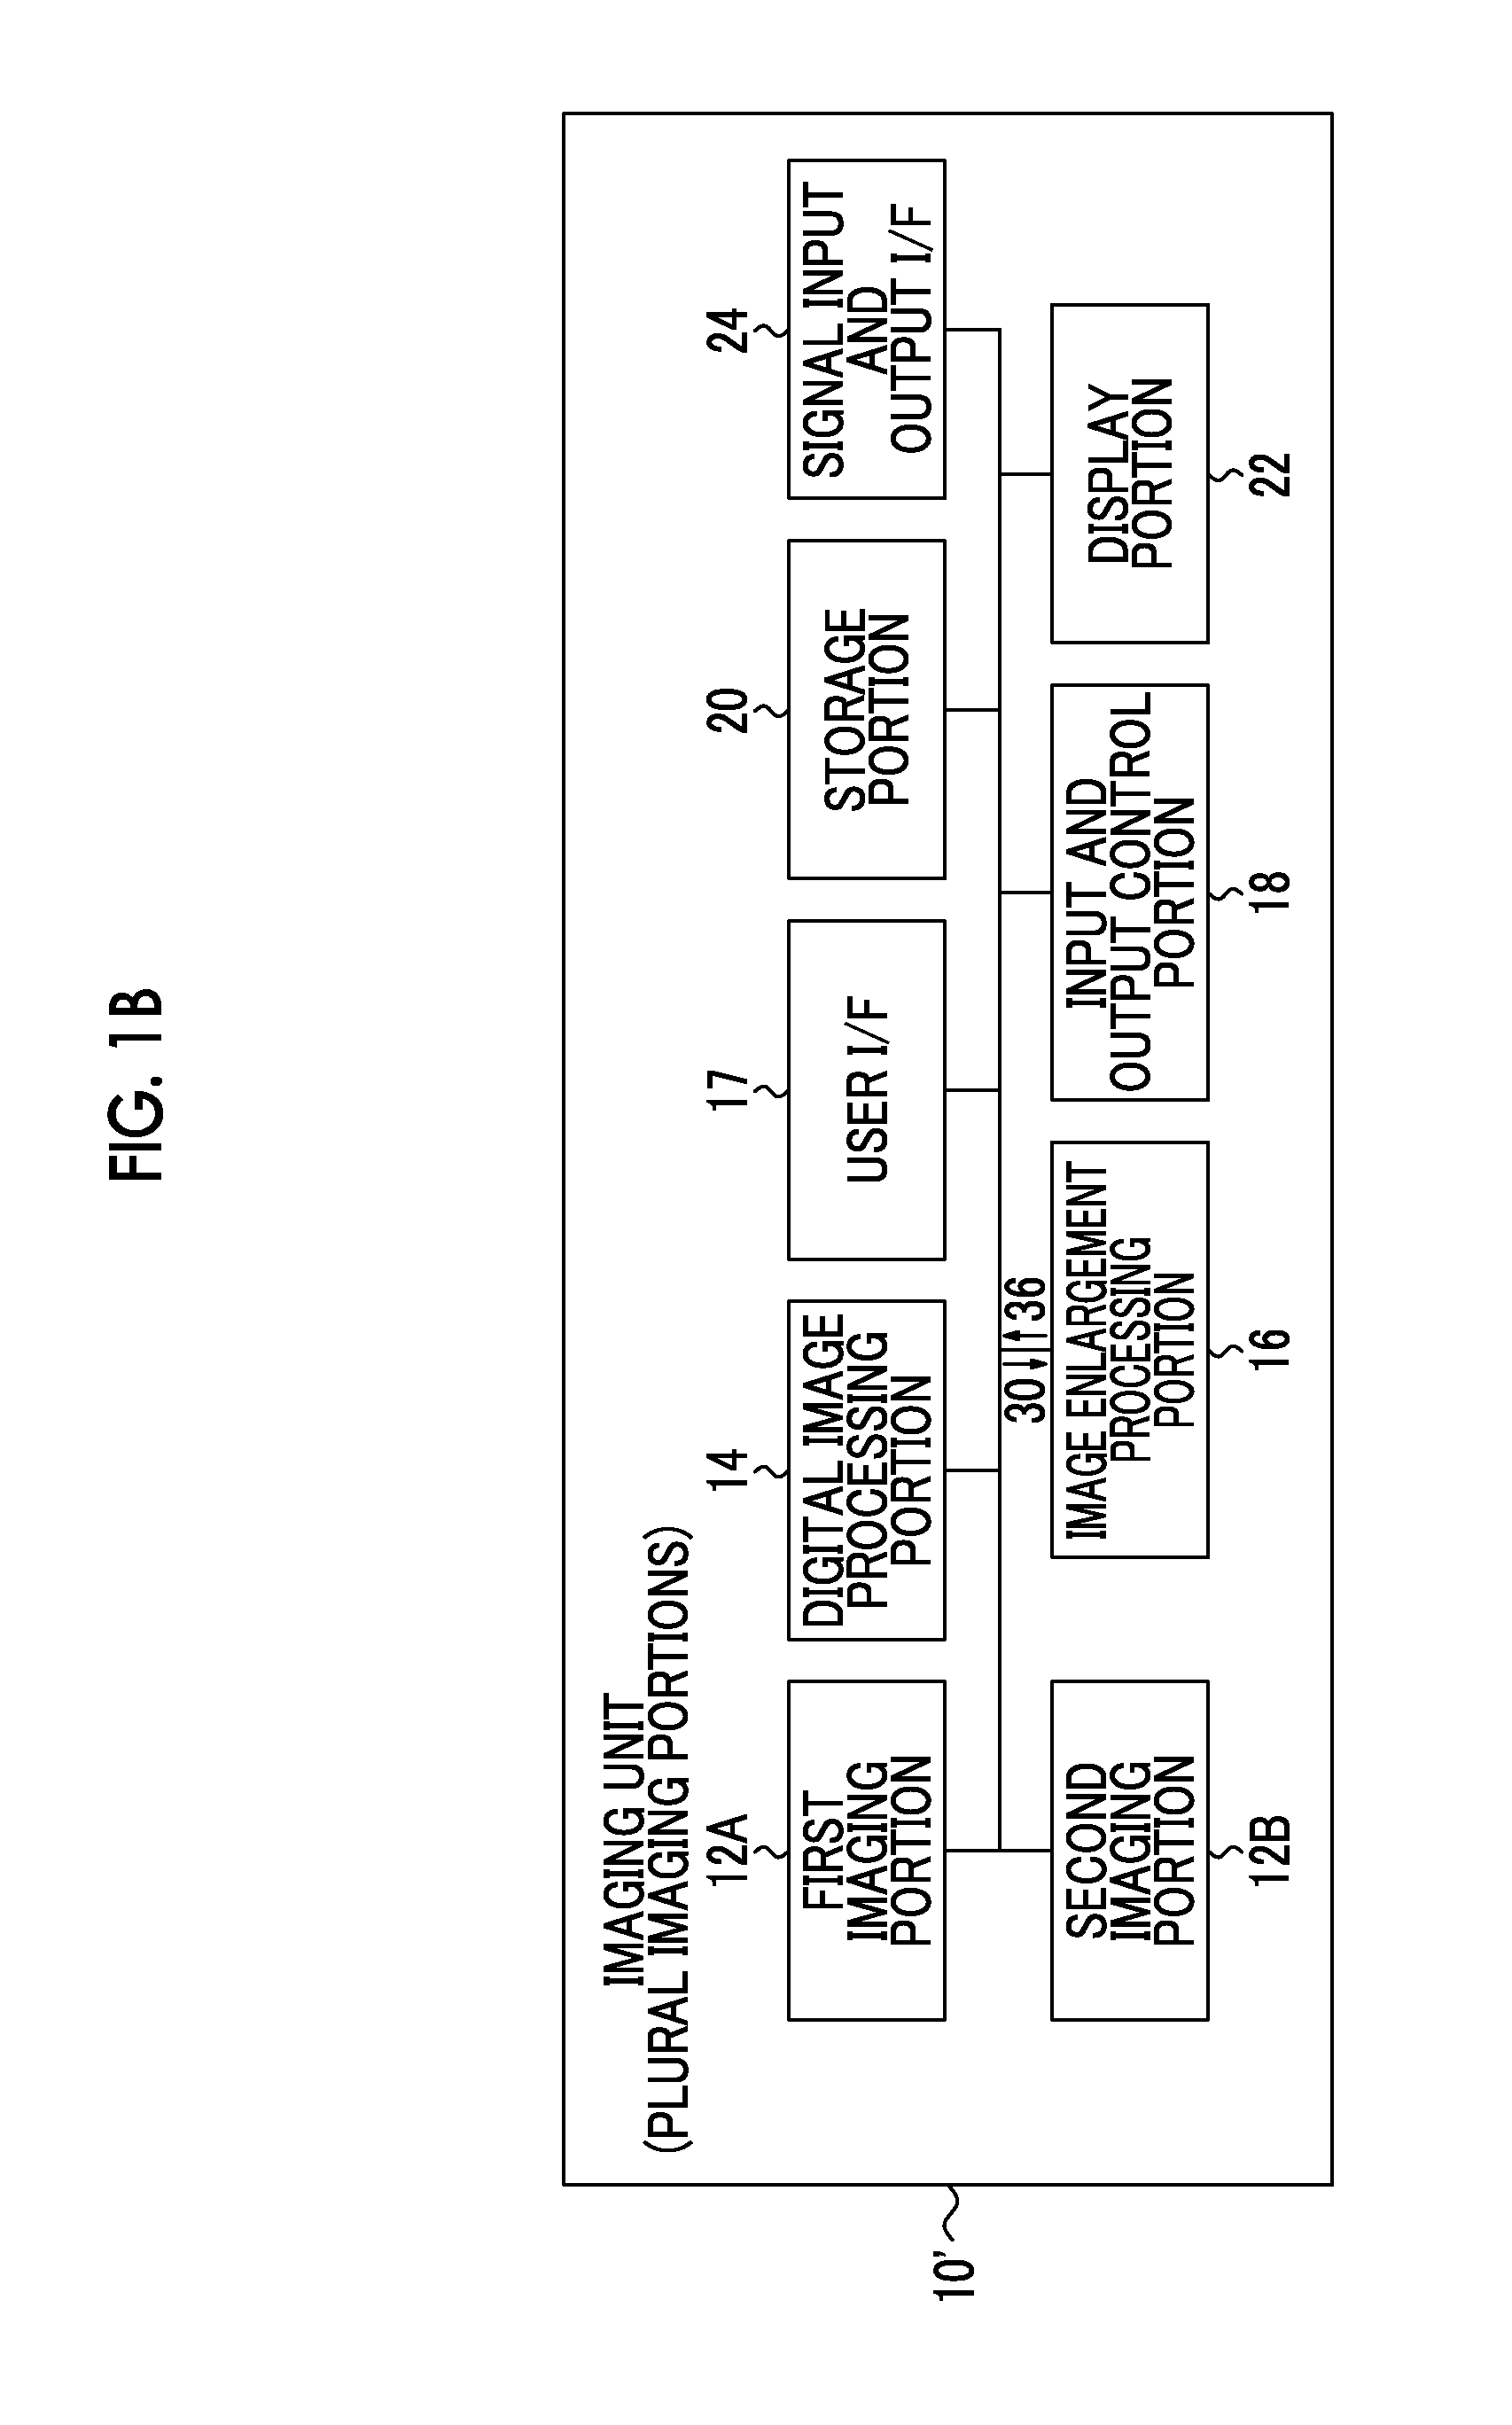 Image processing device, imaging apparatus, computer, image processing method, and non-transitory computer readable medium